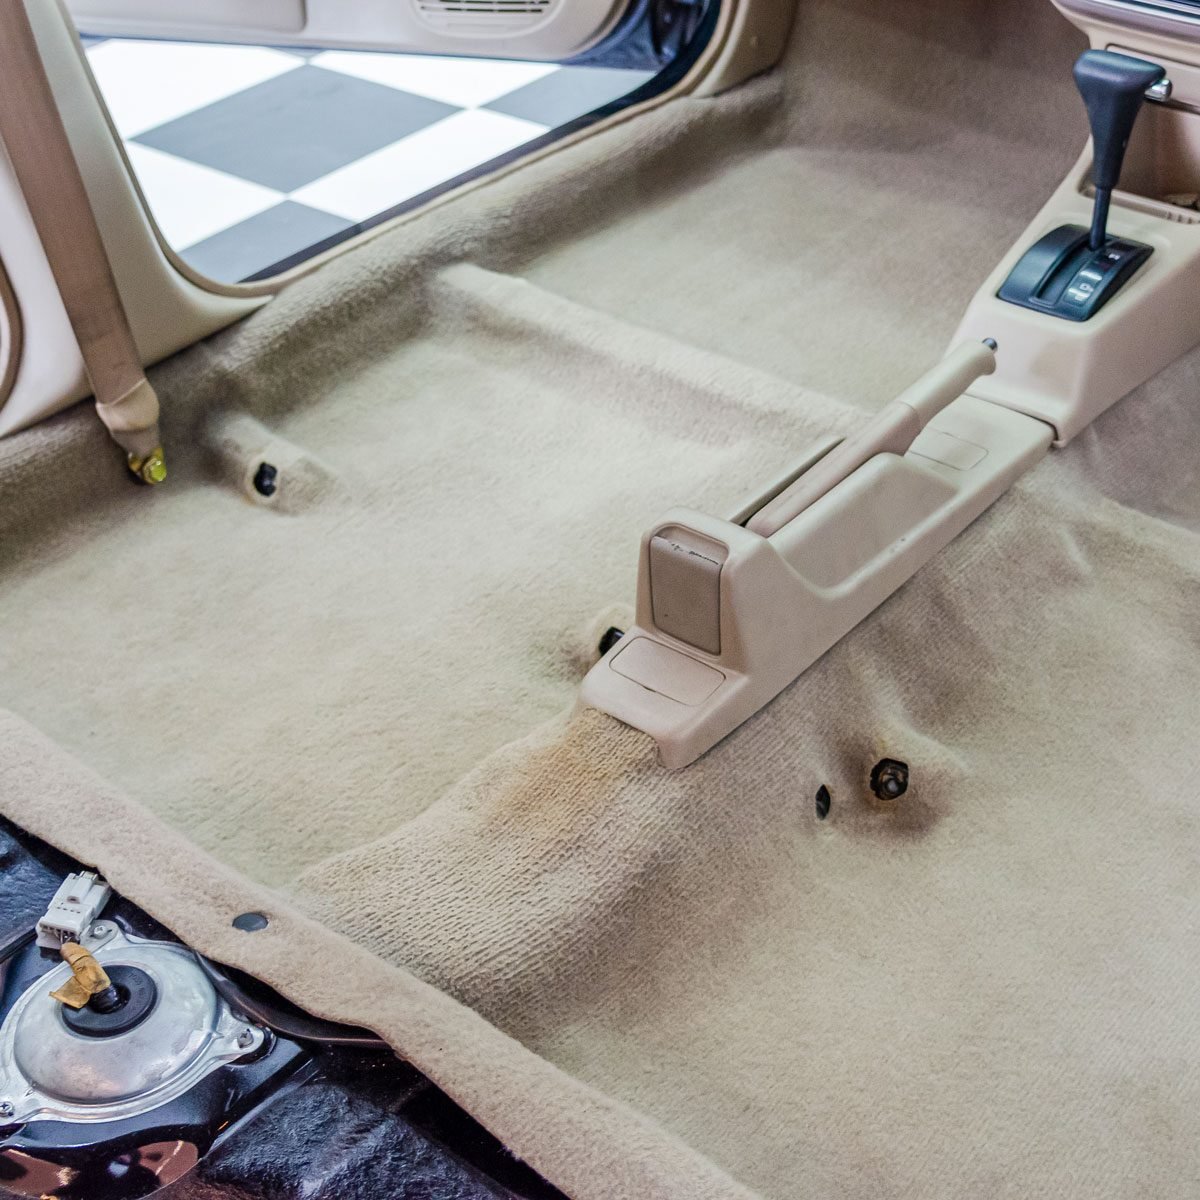 How To Replace the Carpet in Your Car